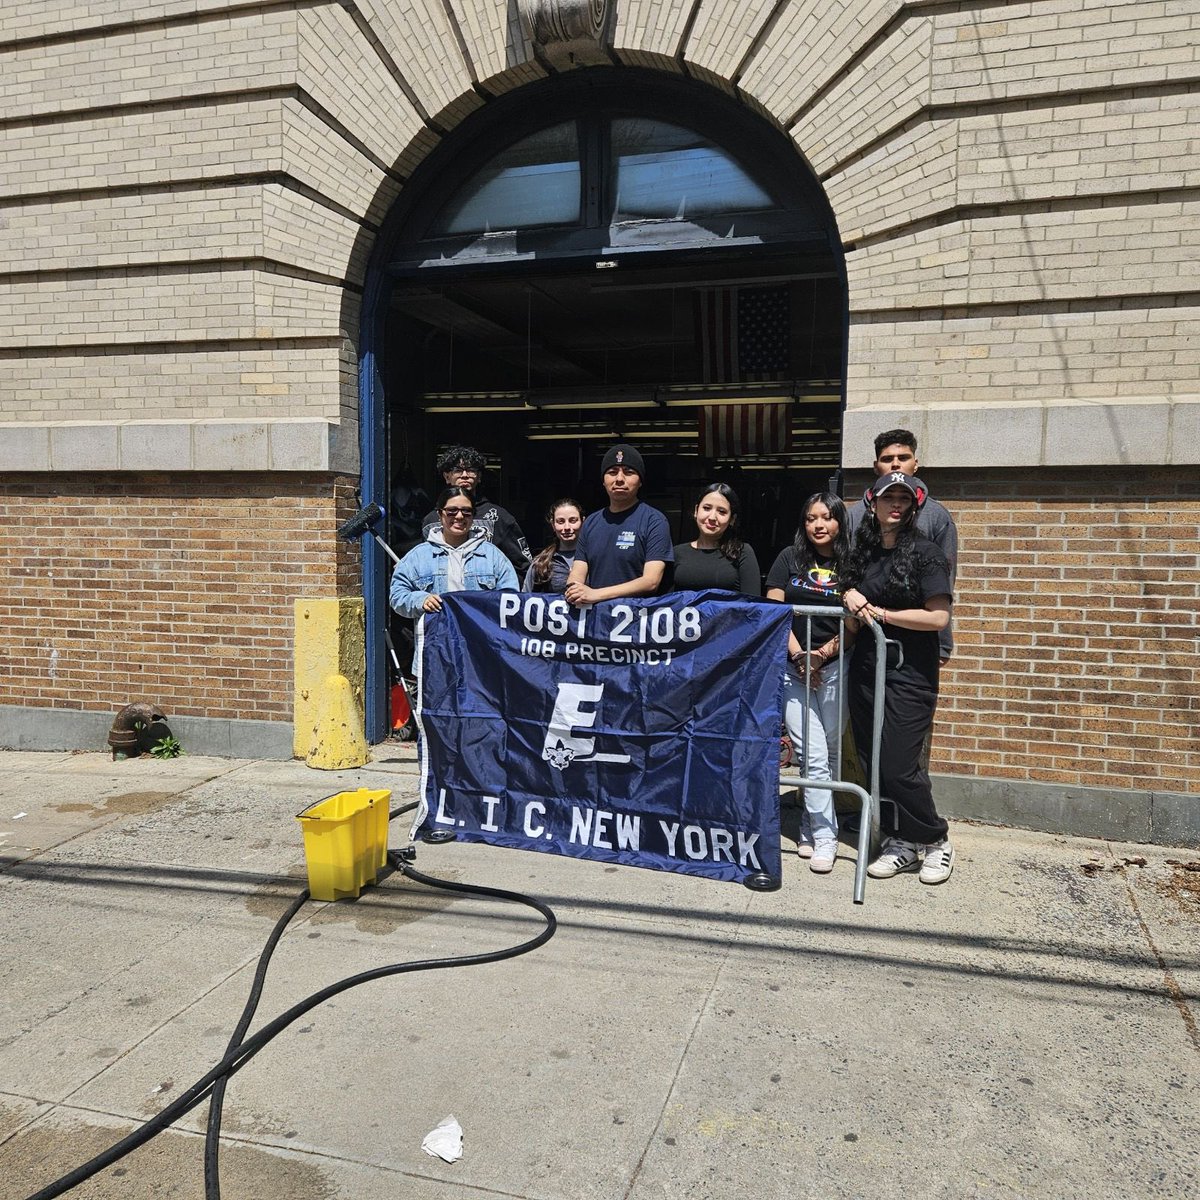 Our 108 Precinct Explorers volunteered their time to help keep our fleet of RMP’s clean. Thank you!!